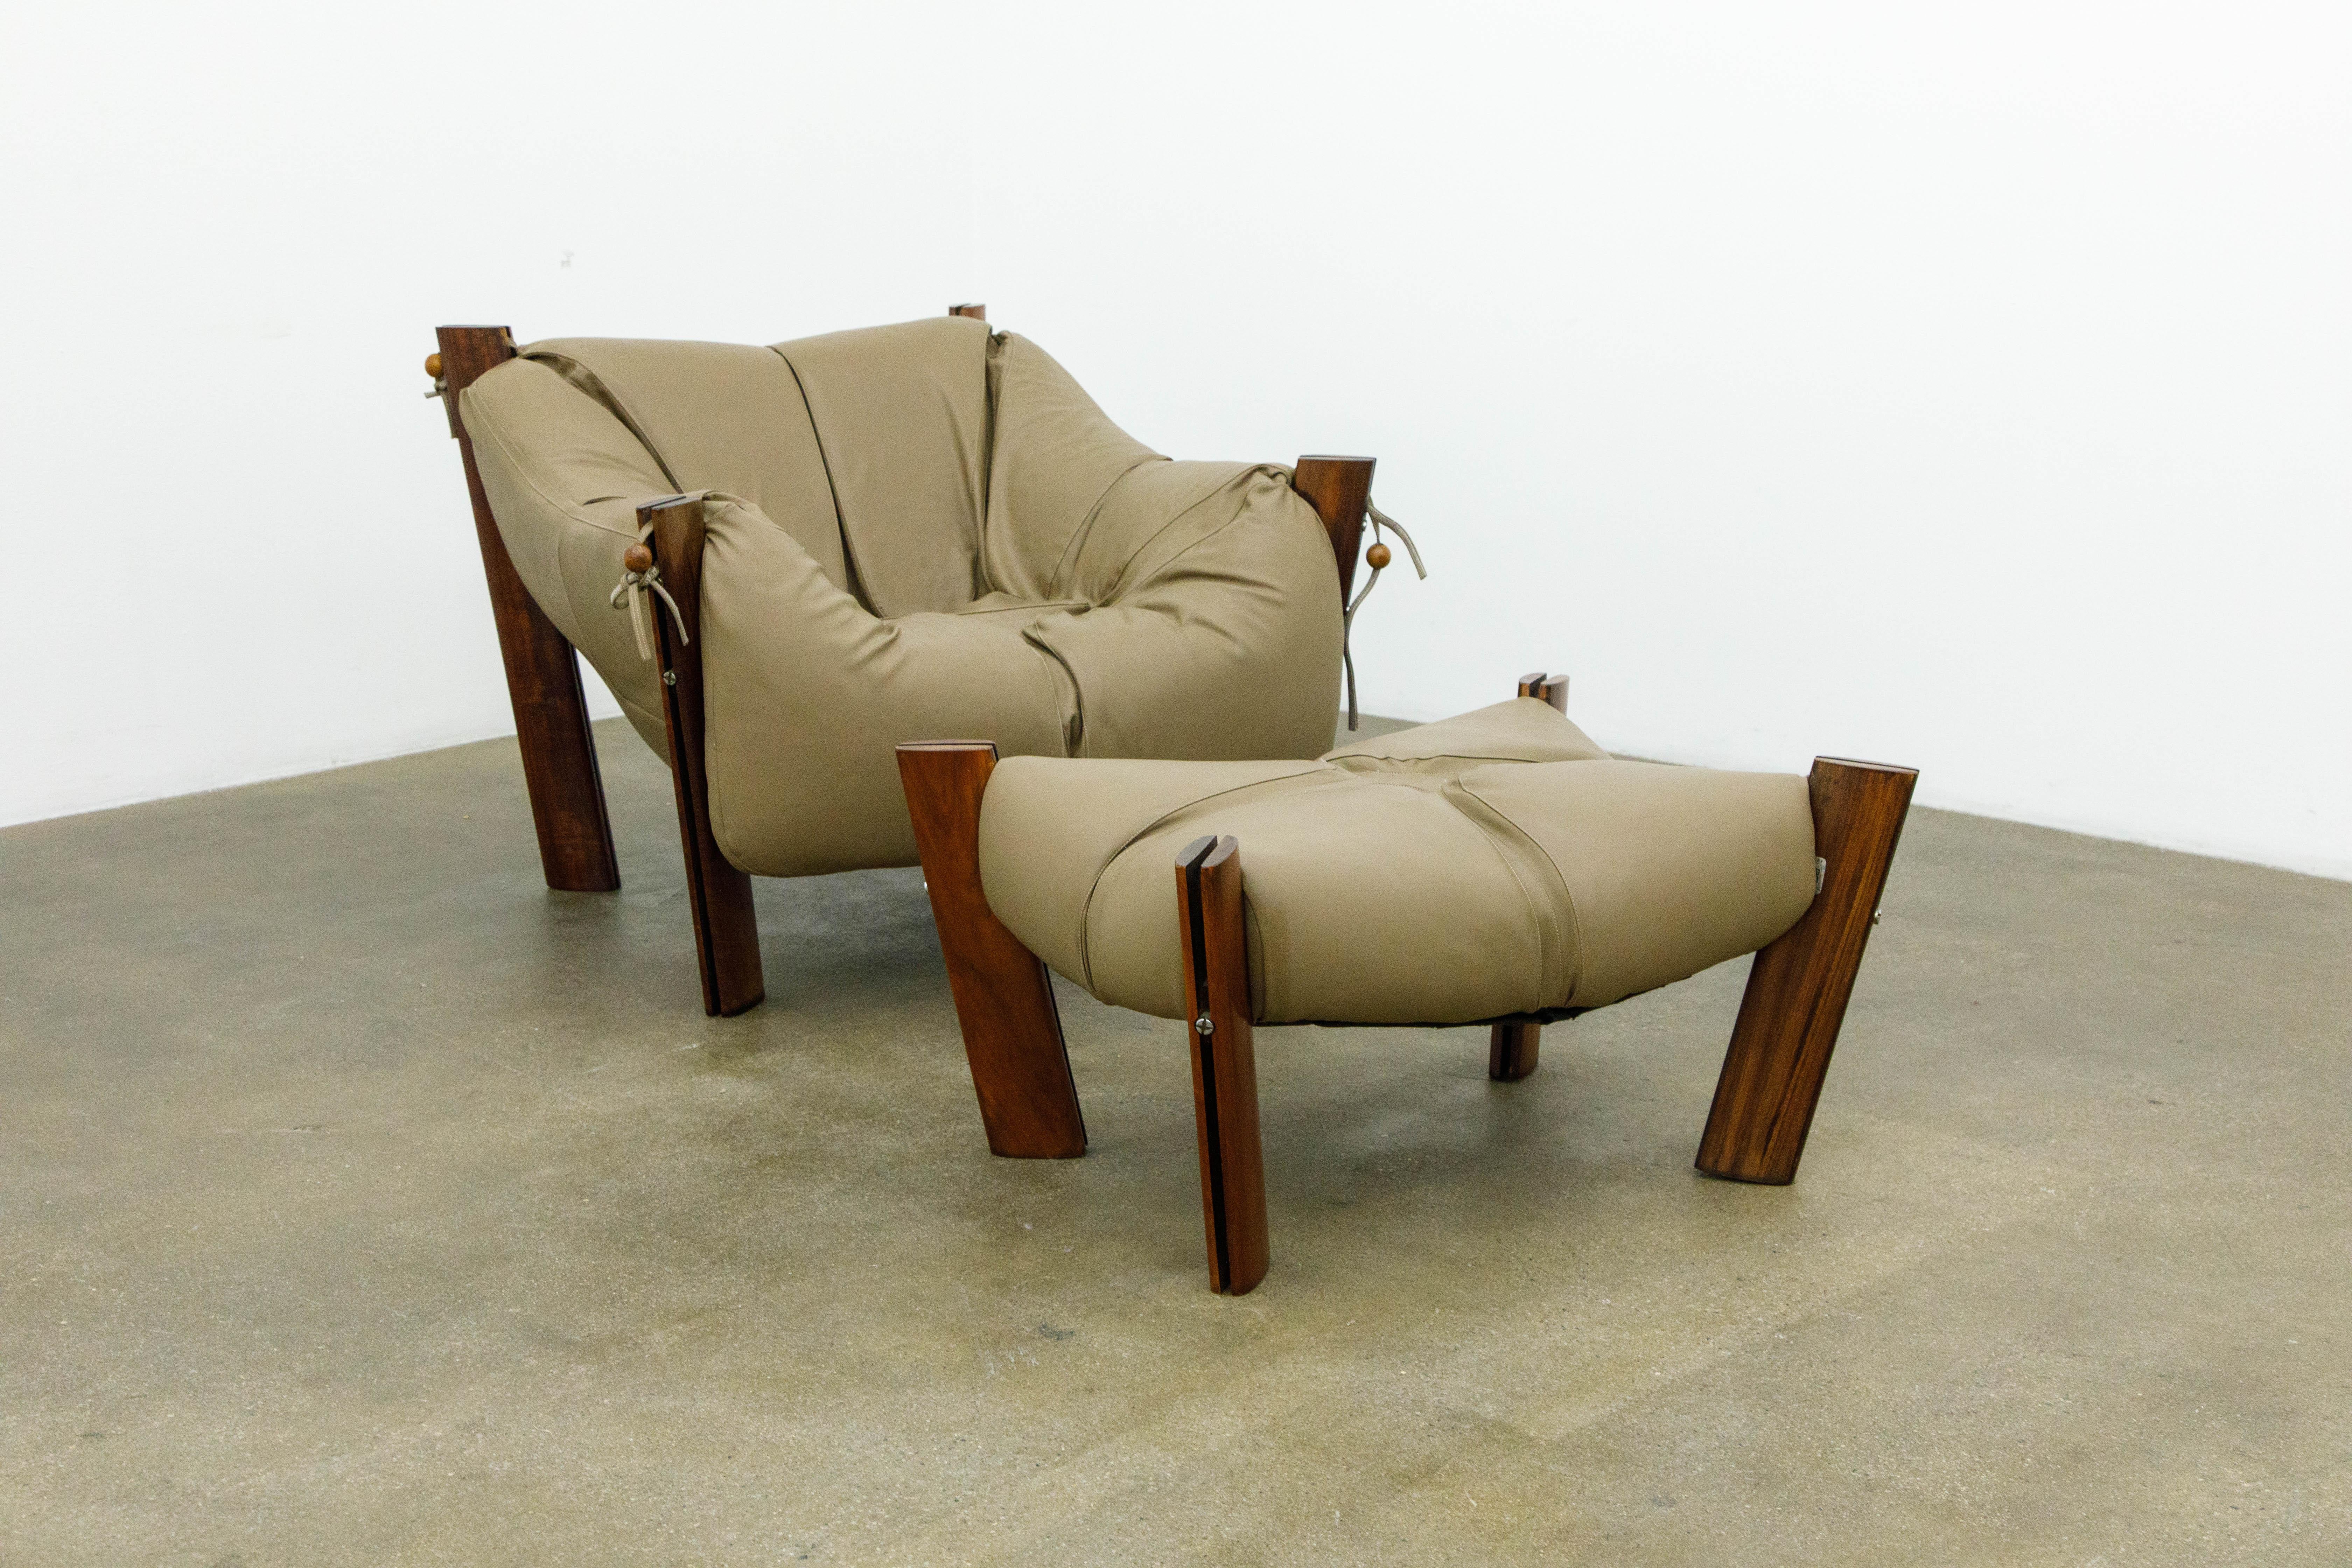 Mid-Century Modern Percival Lafer 'MP-211' Armchair and Ottoman, Brazil circa 1960s, Signed